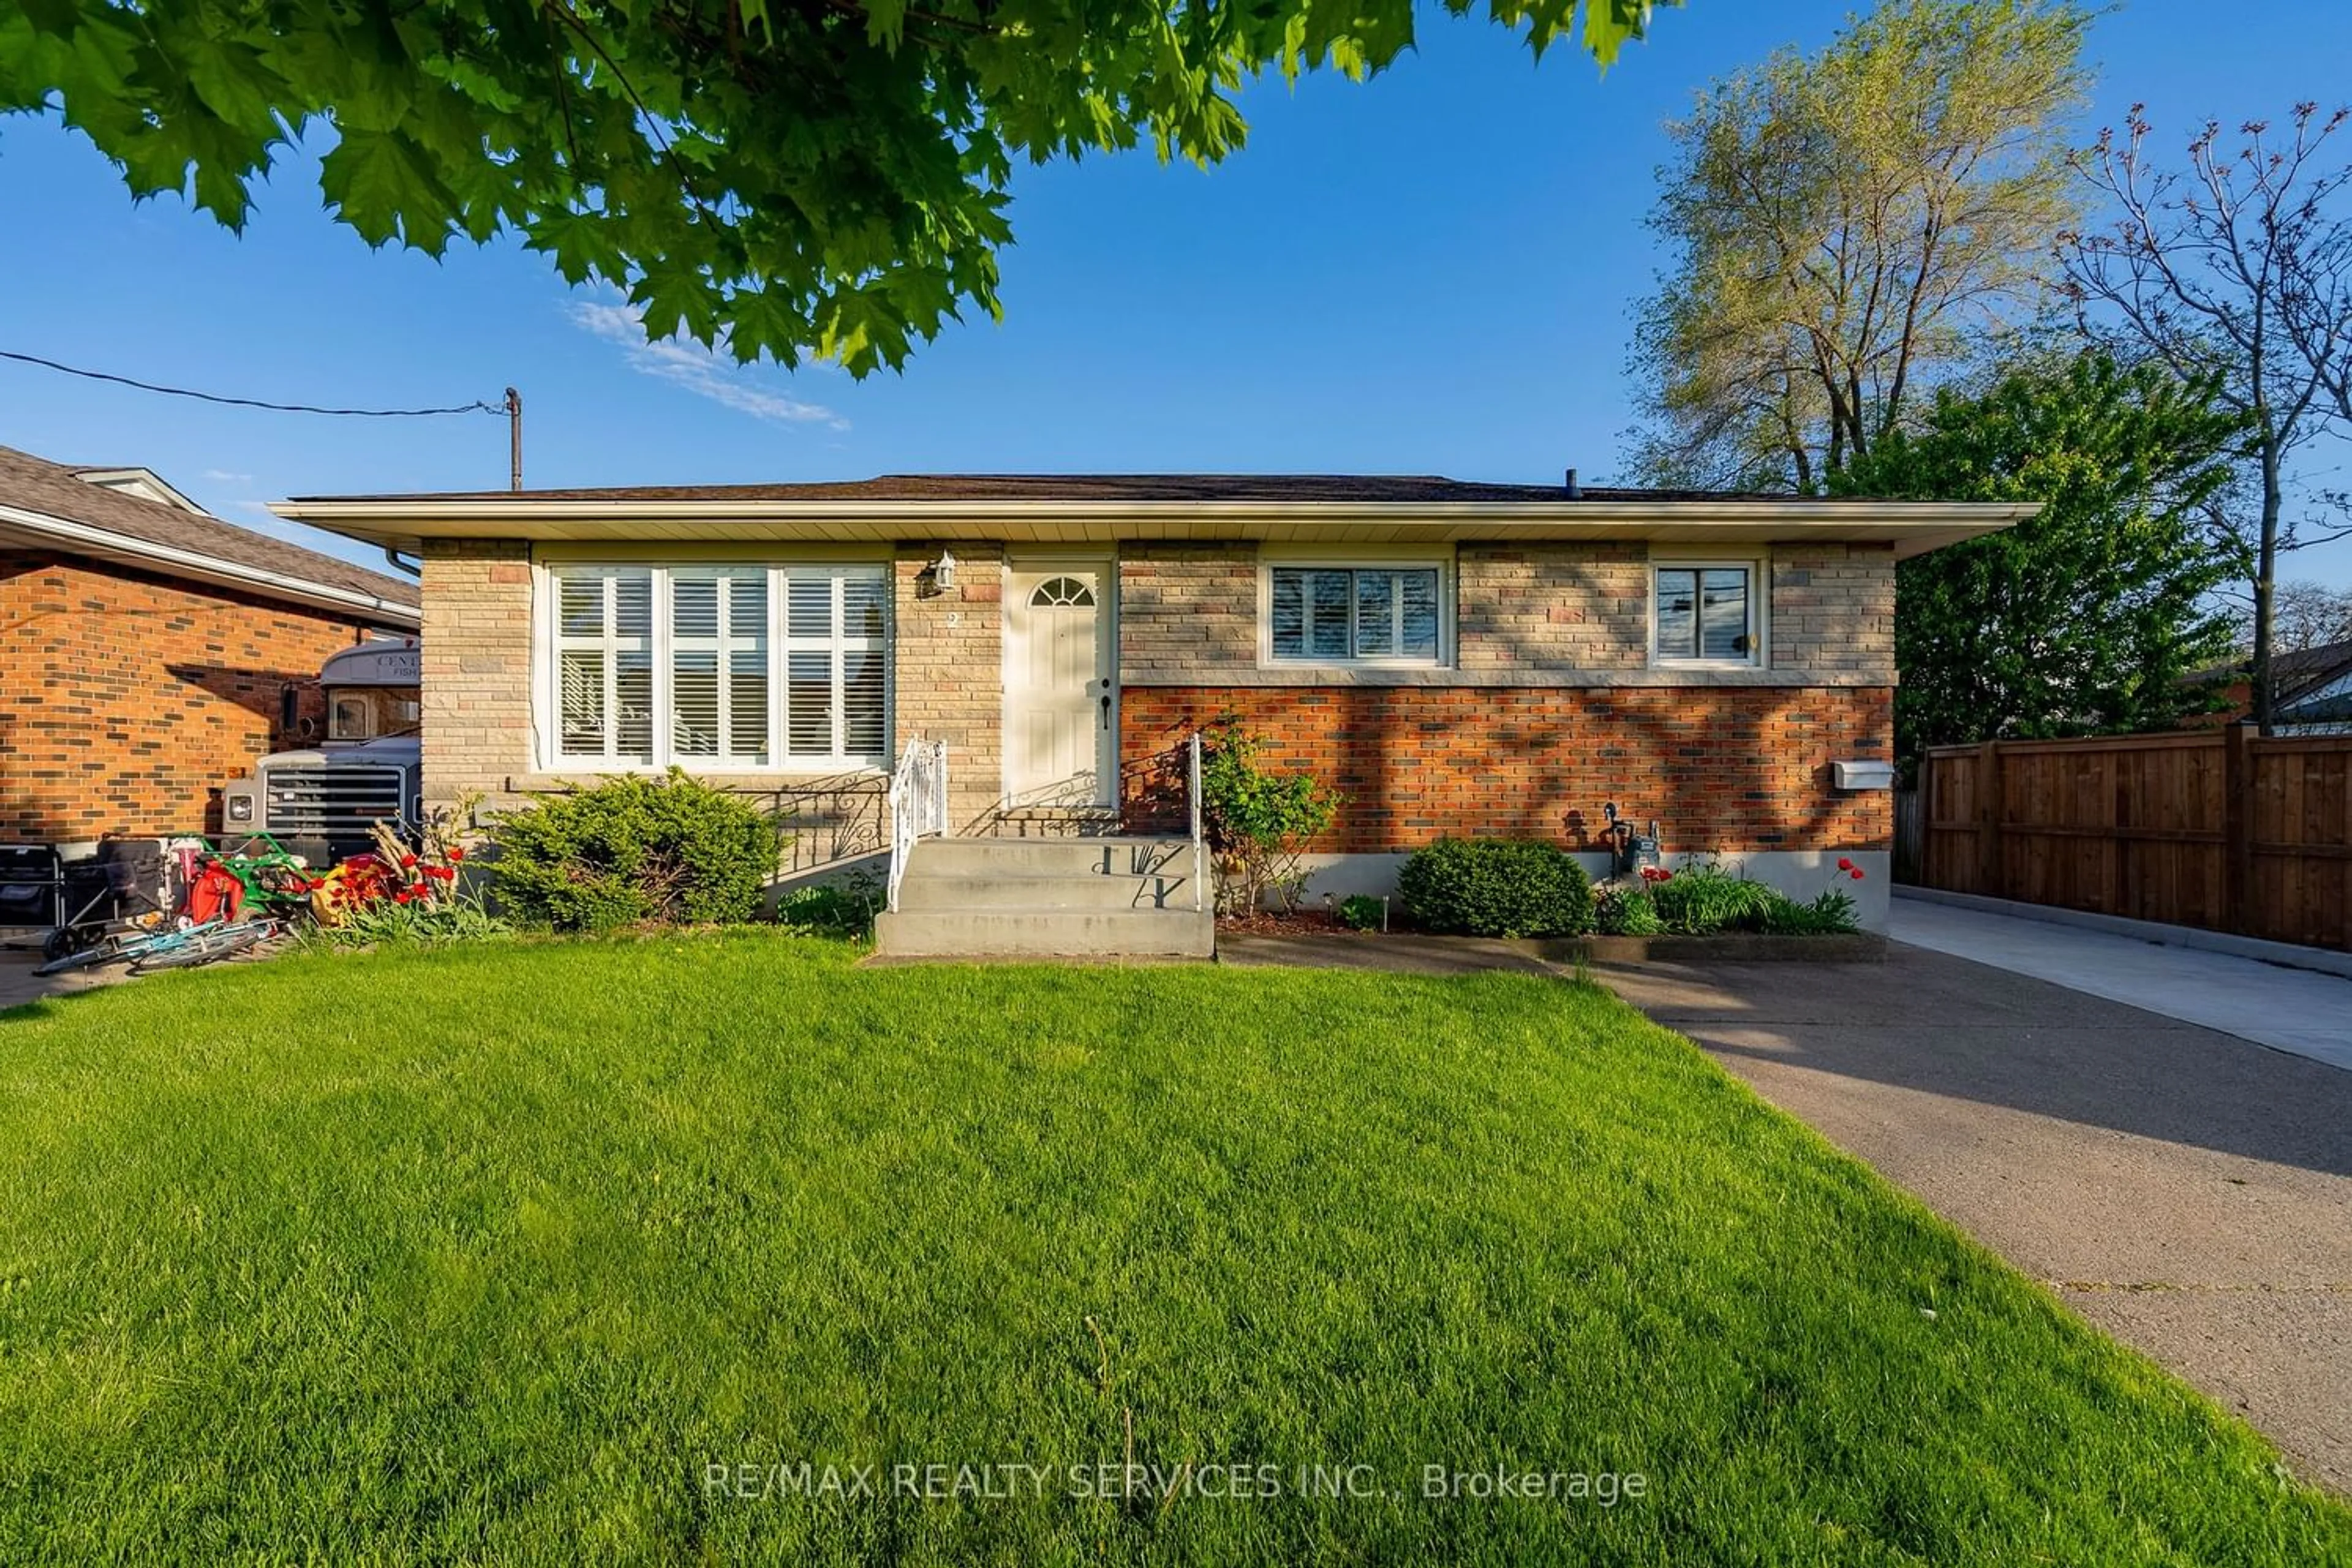 Home with brick exterior material for 2 Anderson St, St. Catharines Ontario L2M 5C9